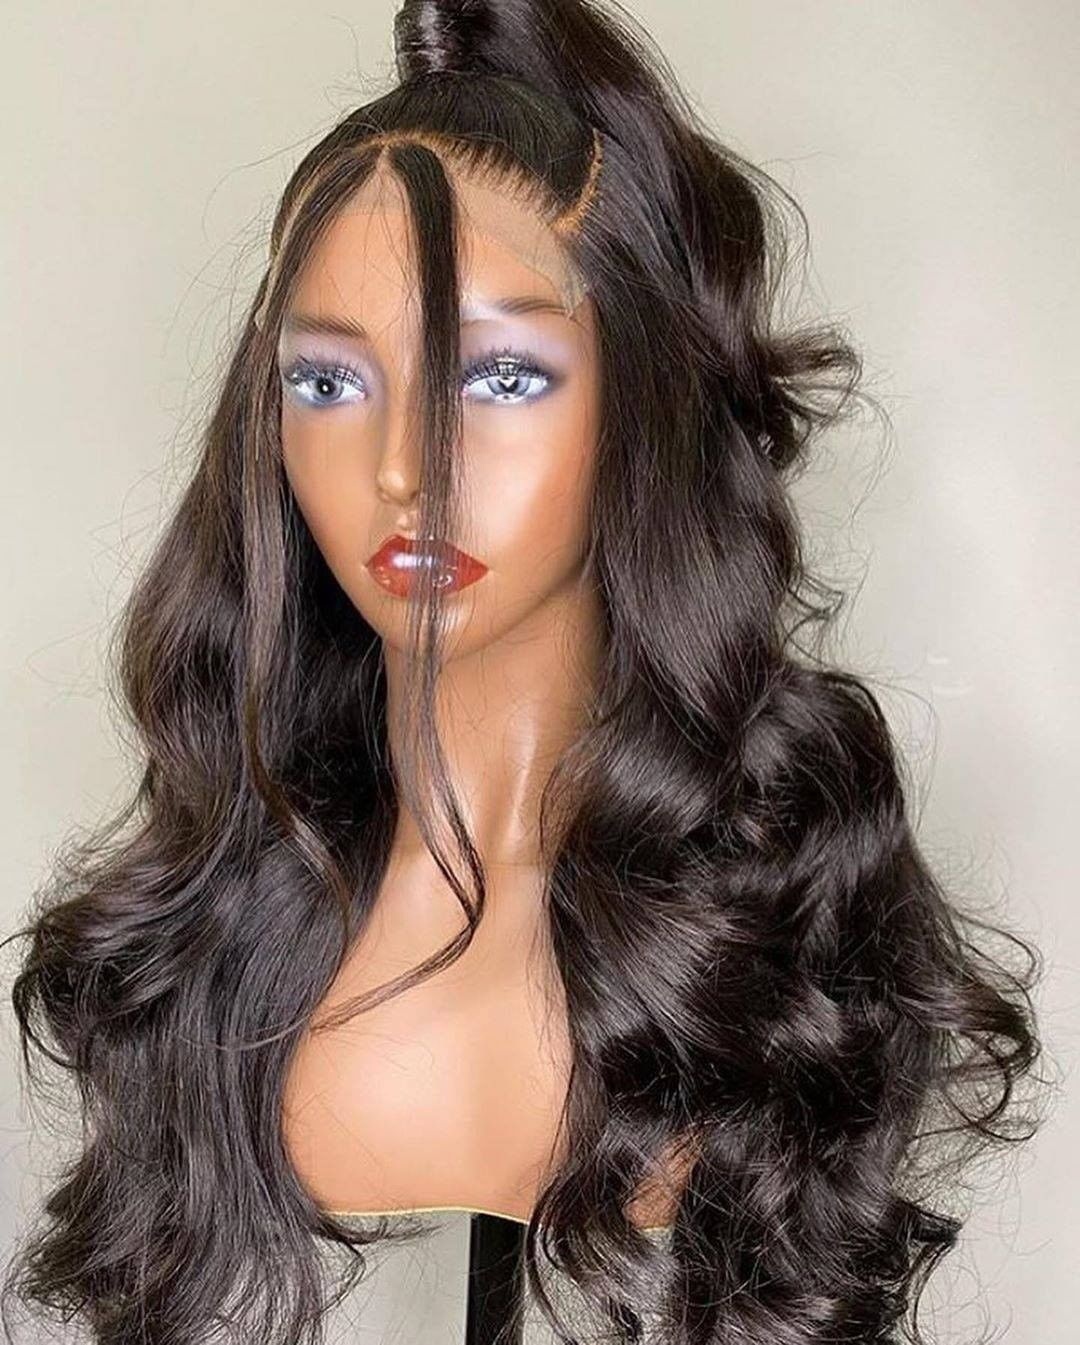 13x6 Swiss Transparent Lace Frontal Pre Plucked Lace Front Wigs